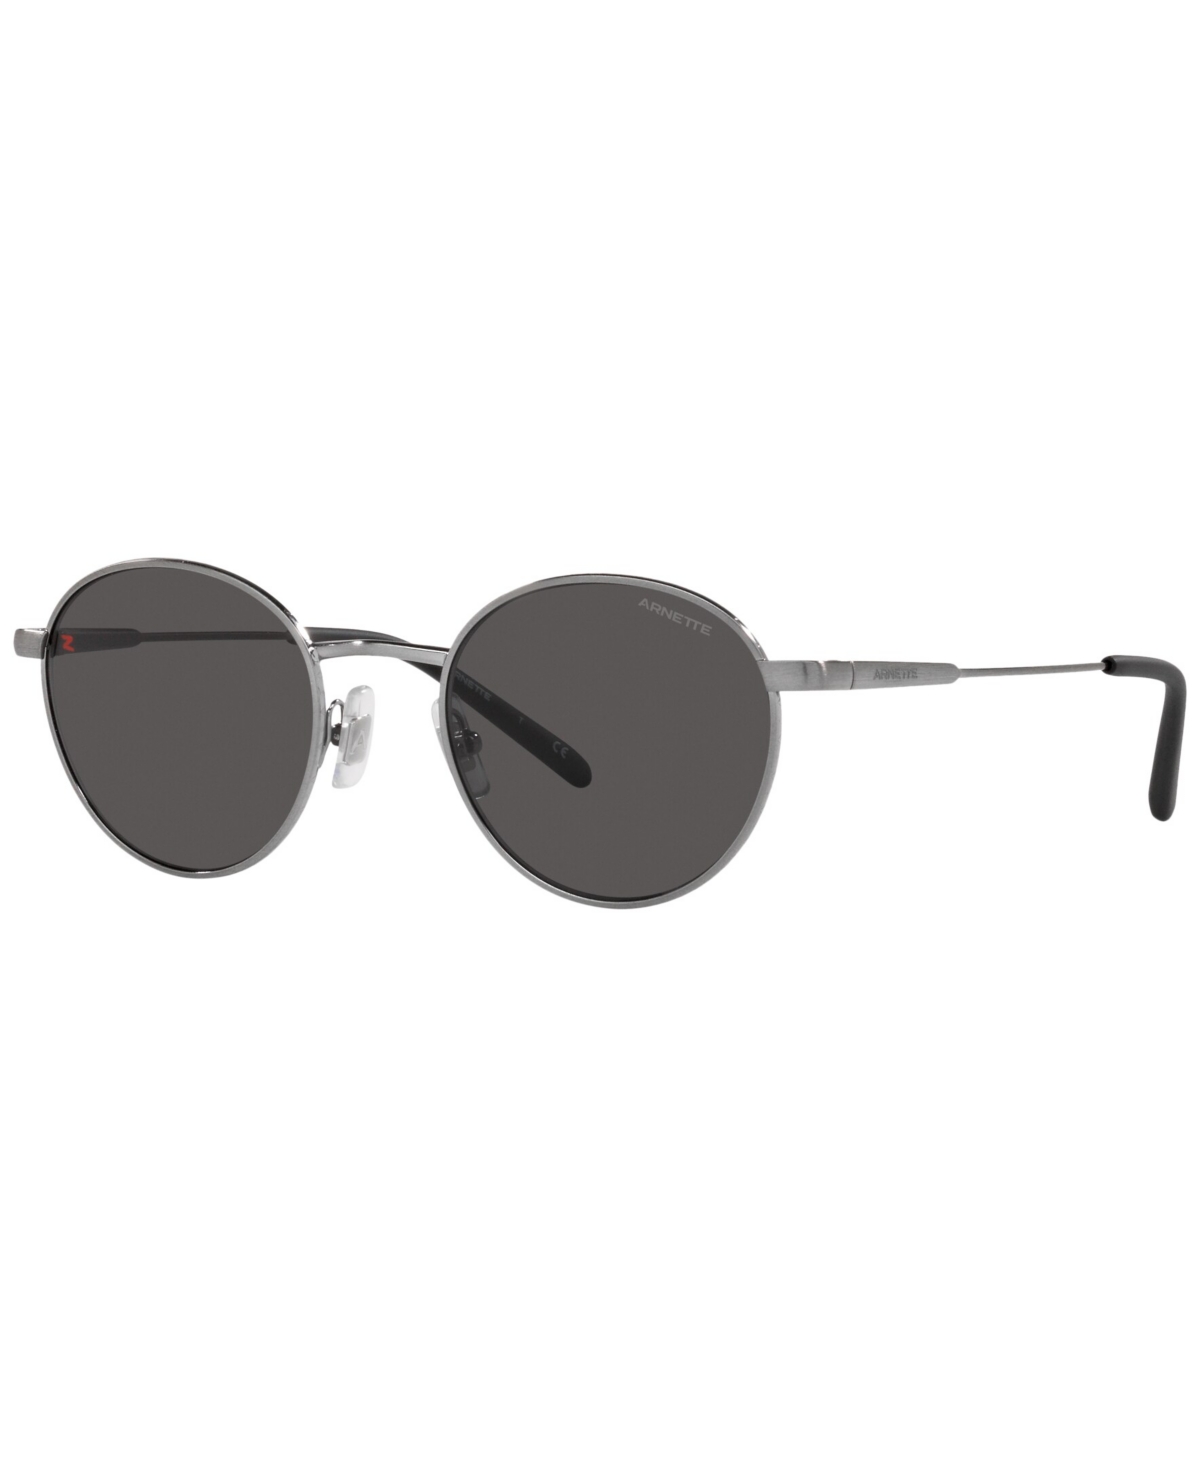 Unisex Sunglasses, AN3084 The Professional 49 - Brushed Light Gold-Tone